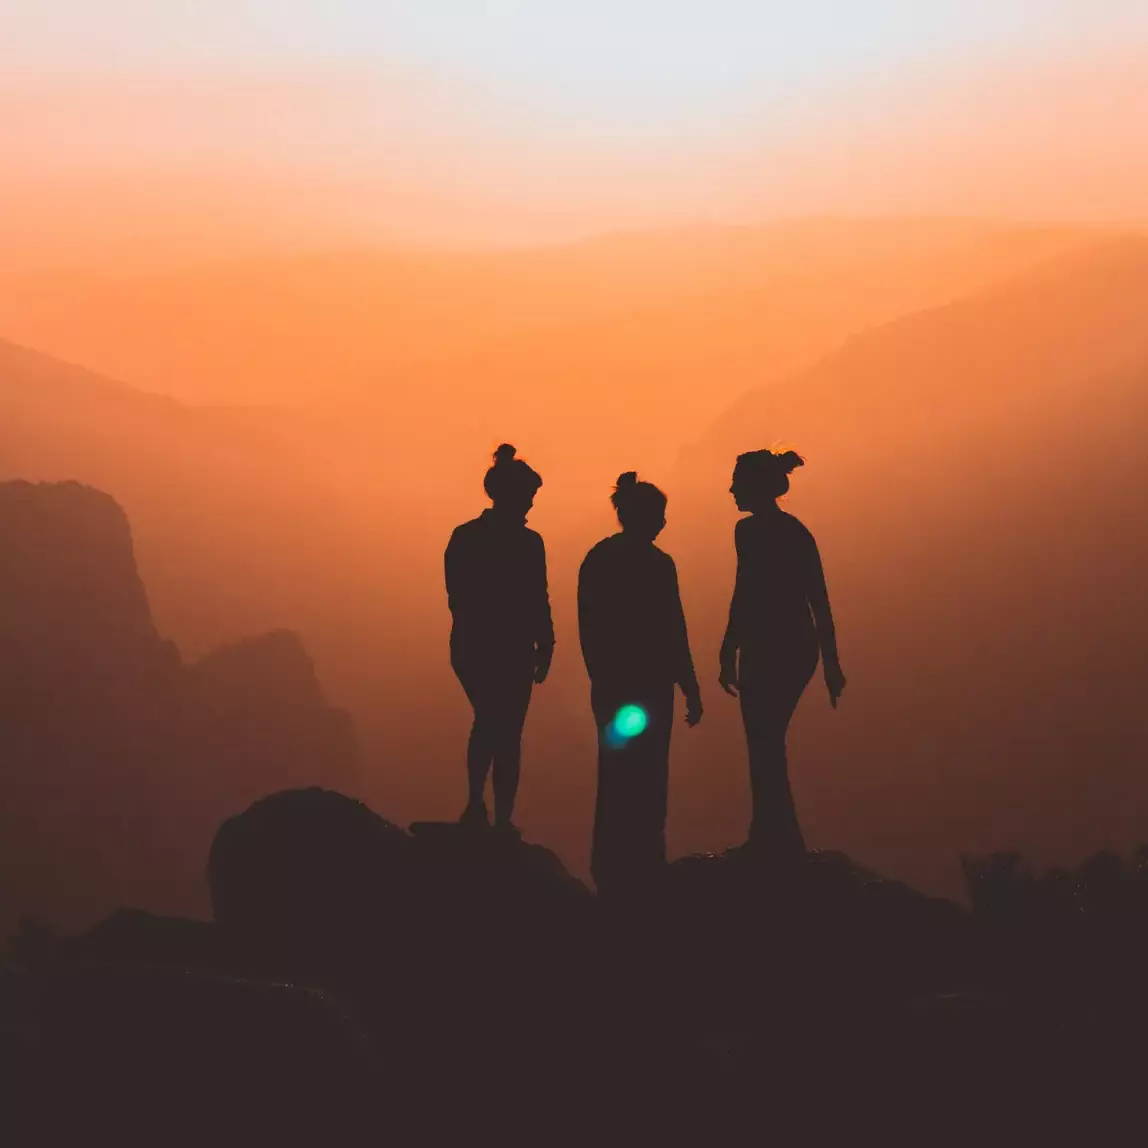 Three silhouettes of women on mountain peak looking out over sunset.